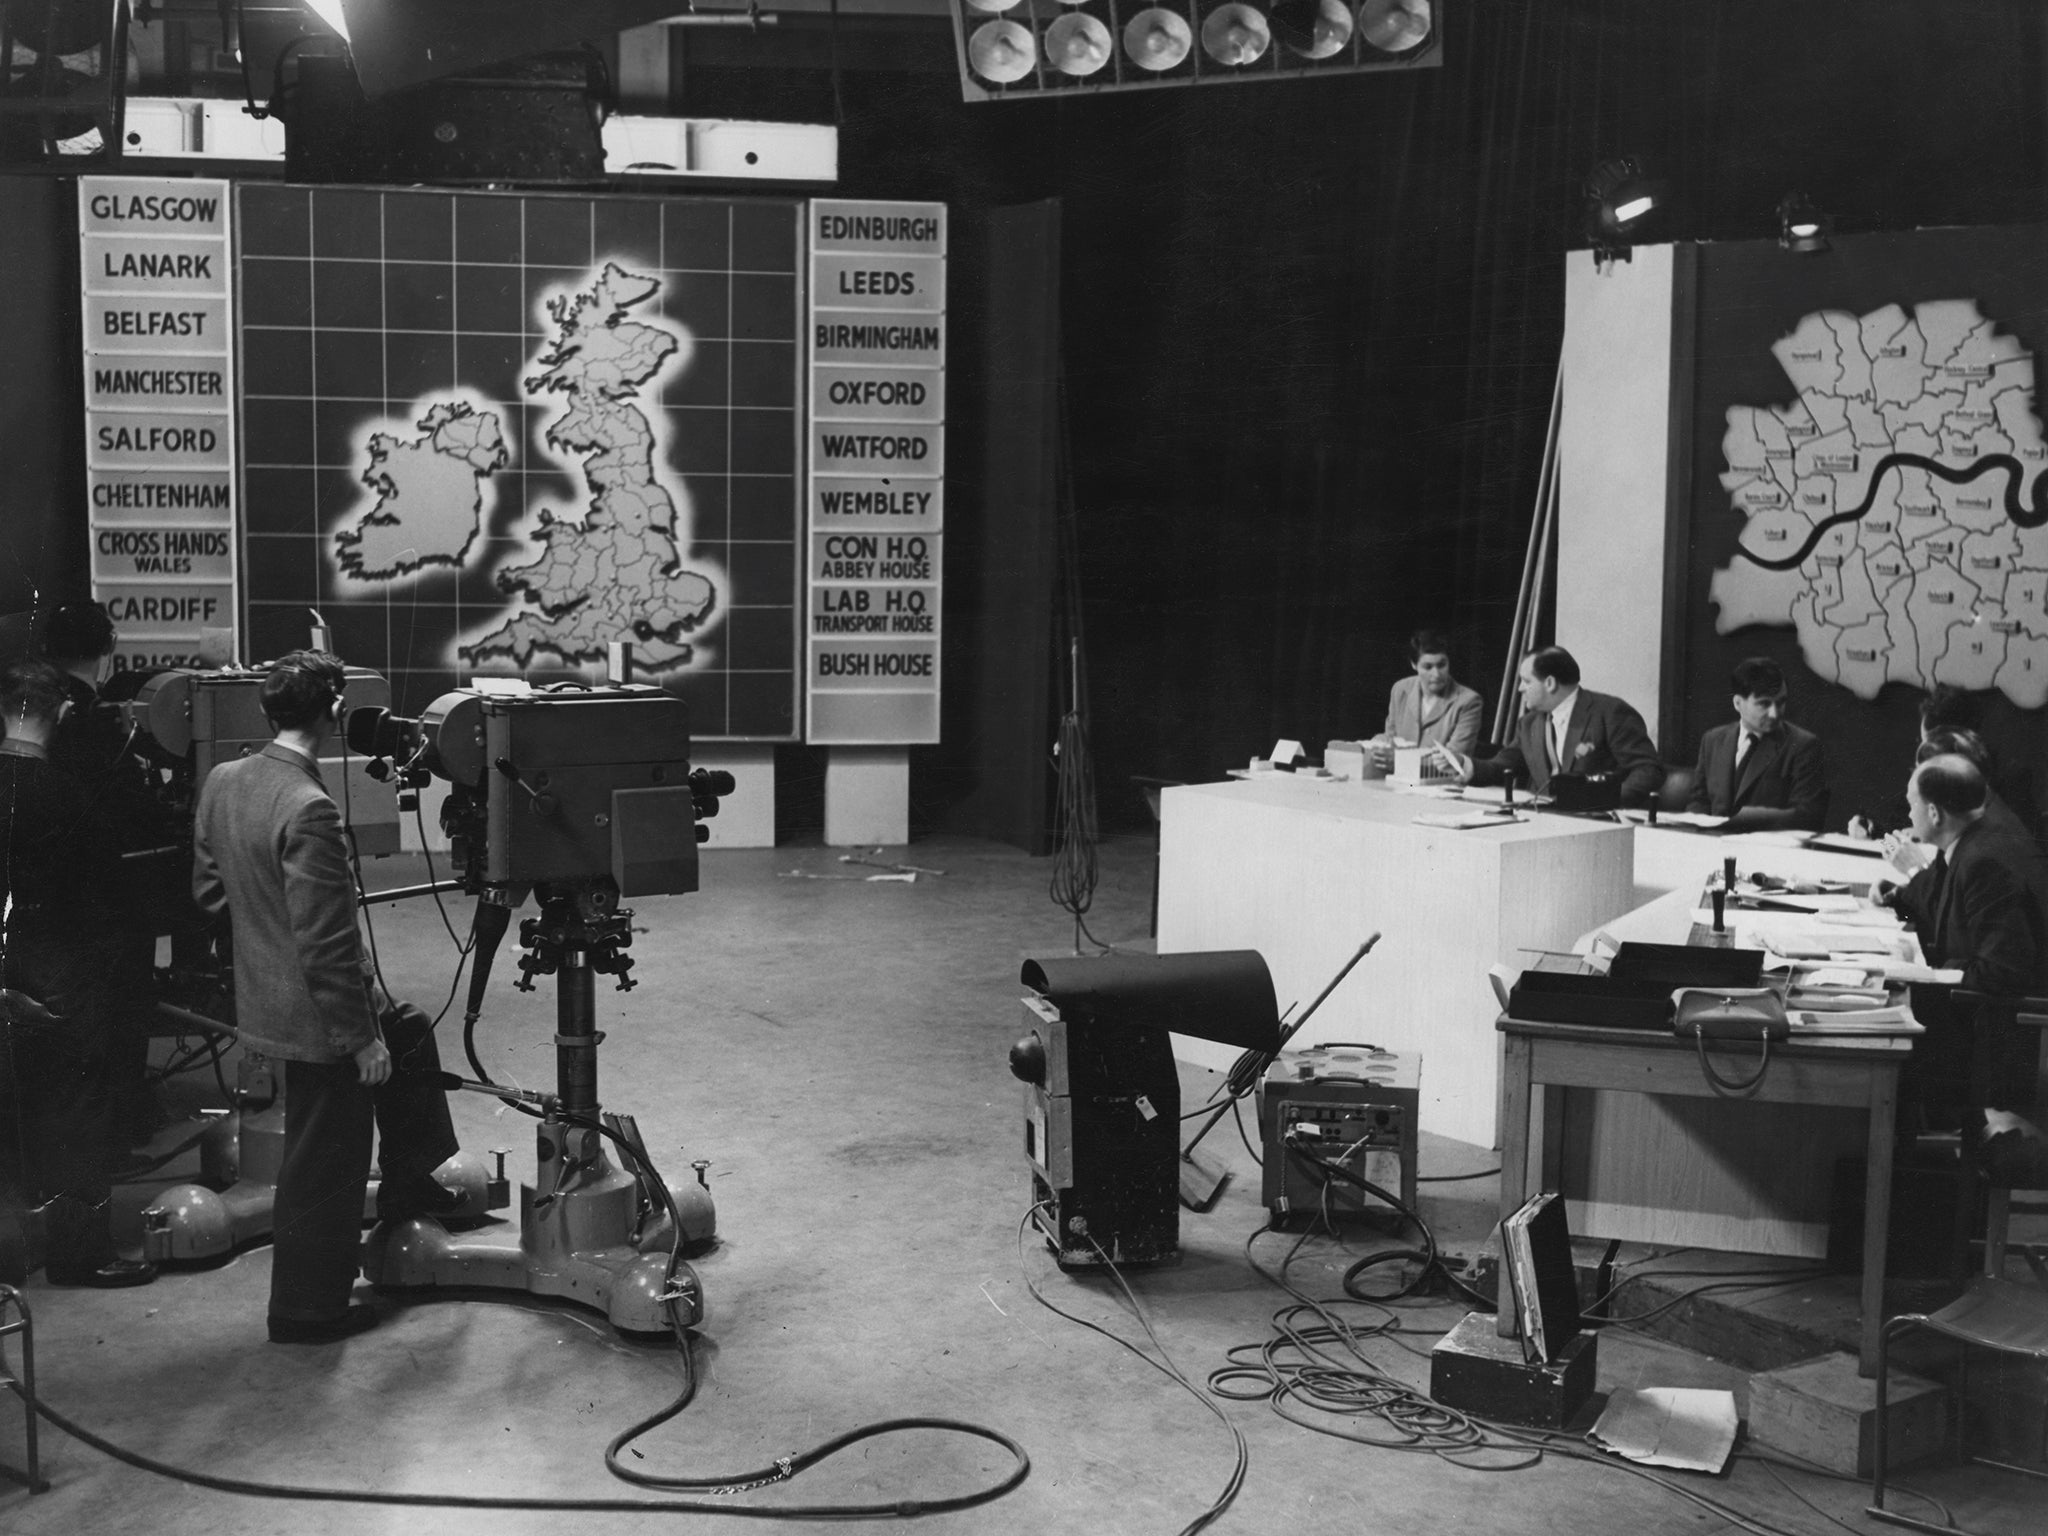 English journalist and broadcaster Richard Dimbleby prepares with statisticians during rehearsals for the BBC's General Election live coverage in 1955